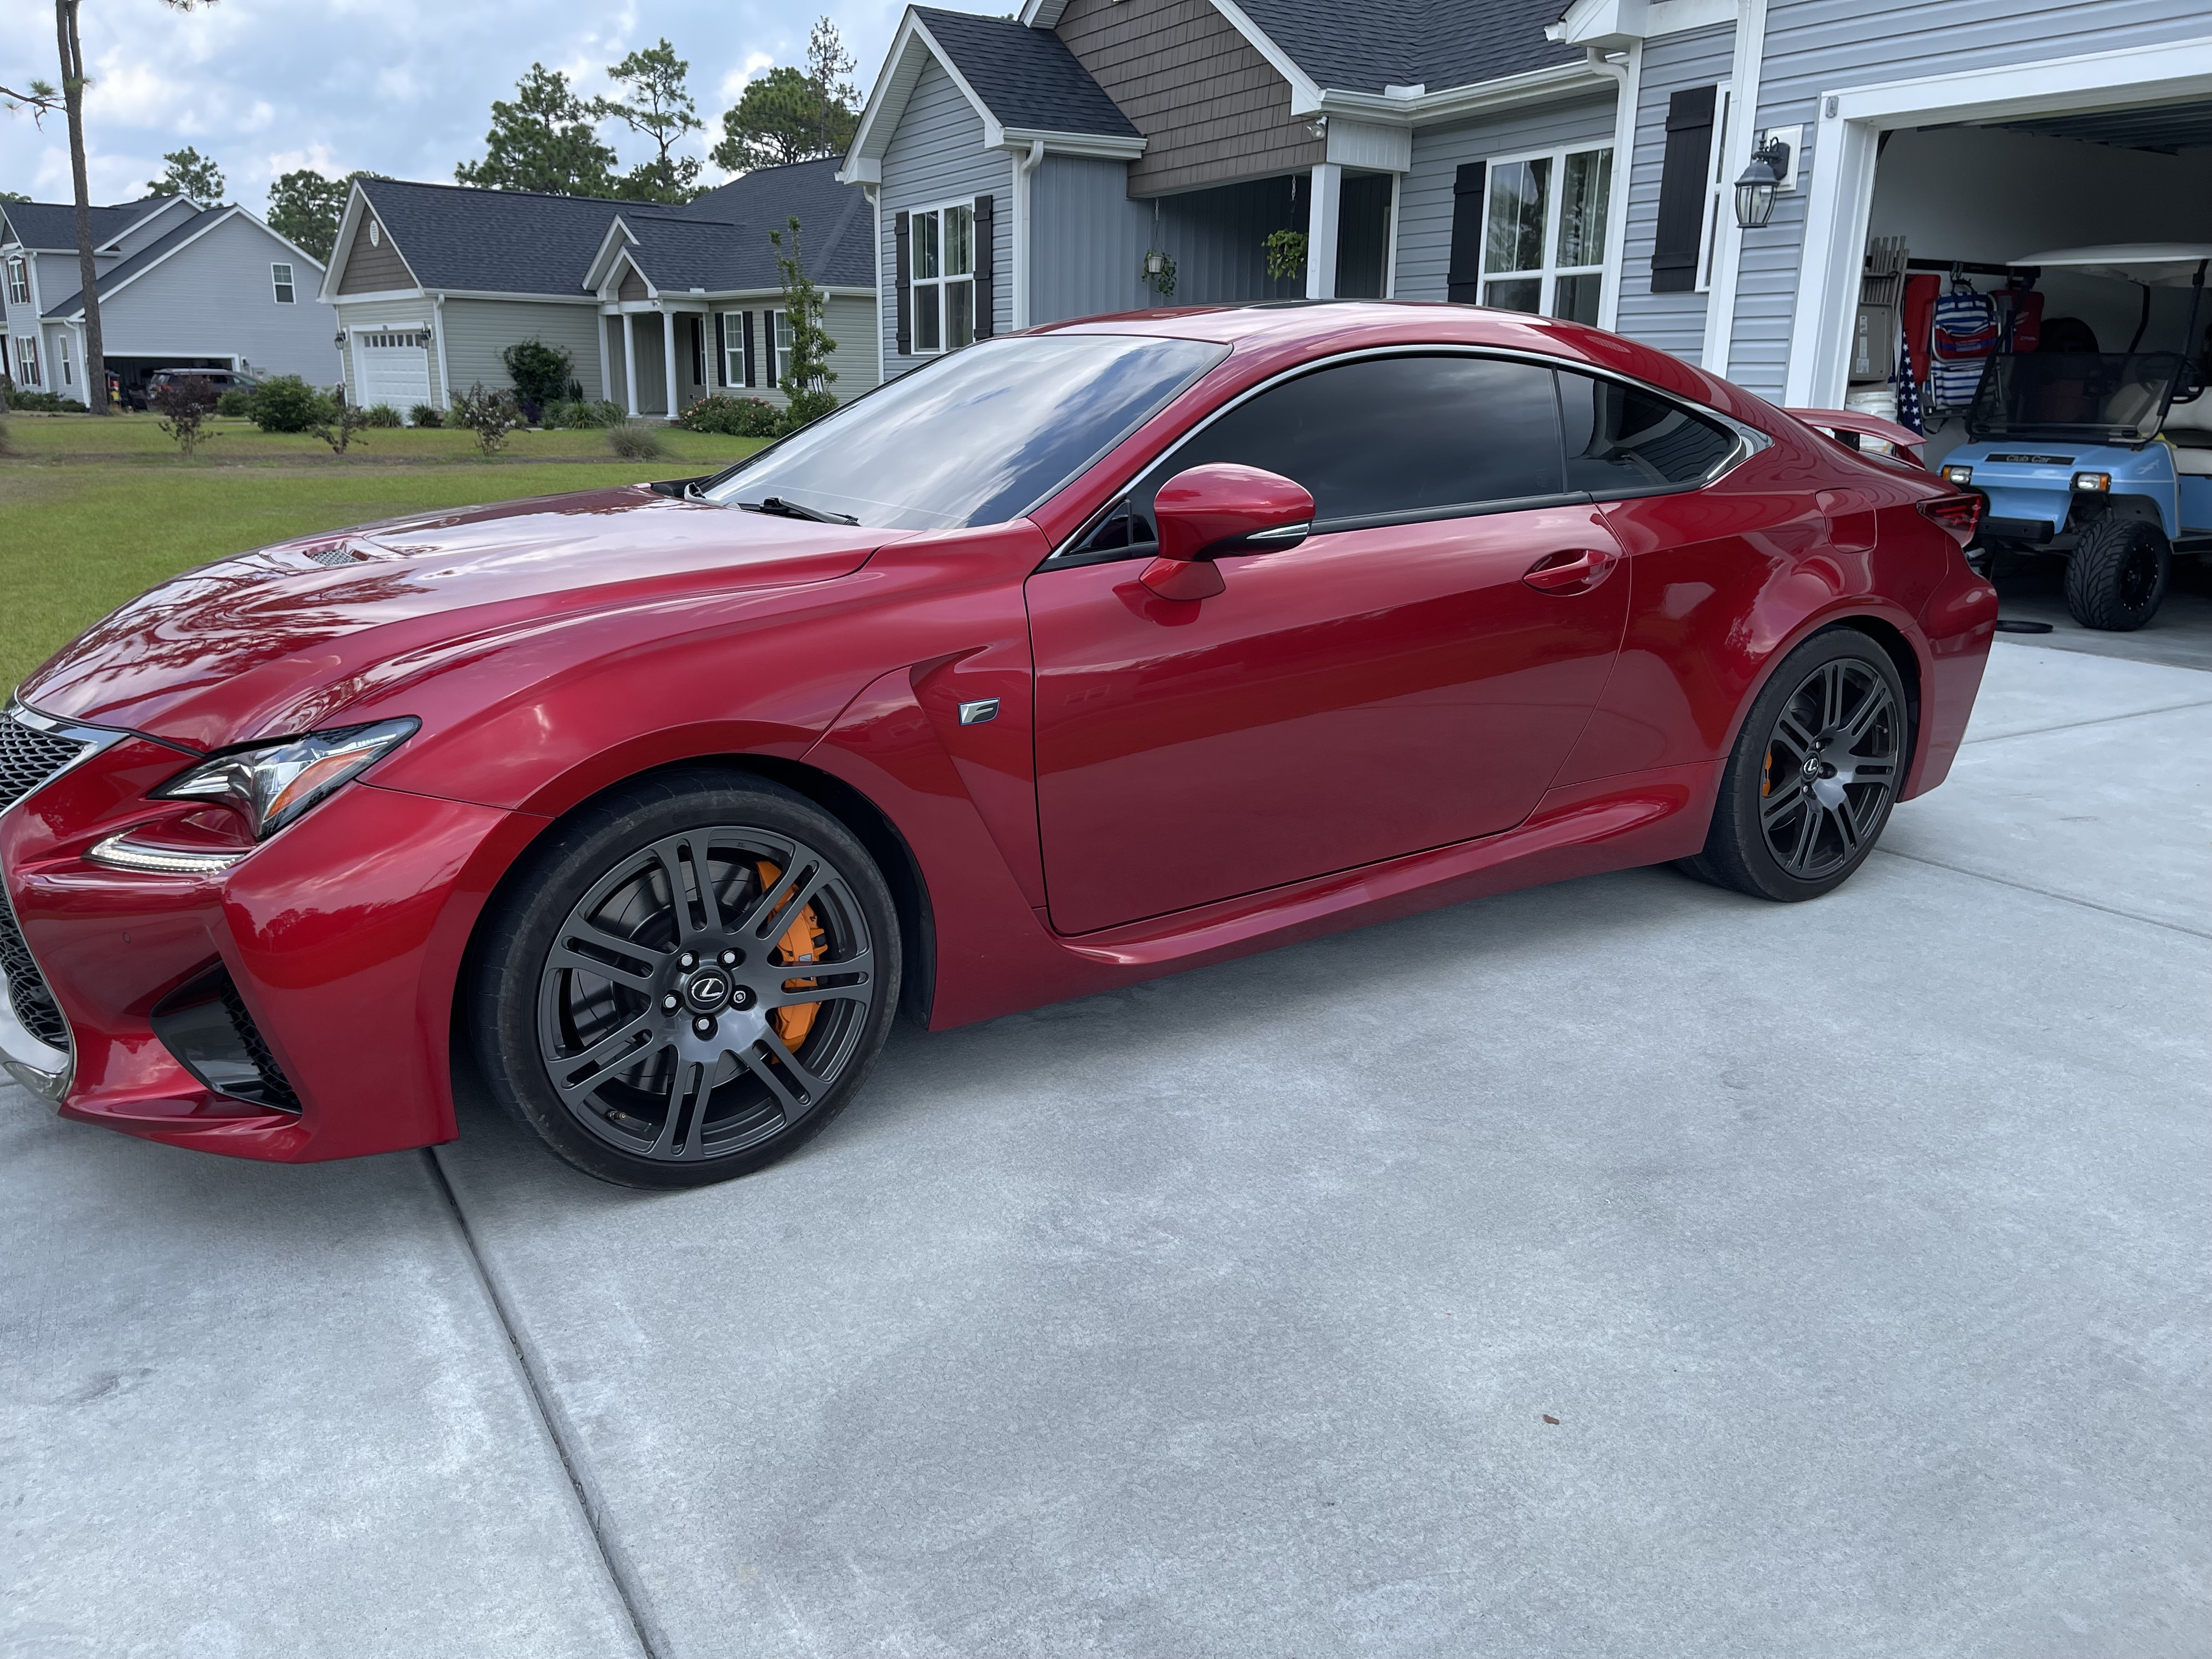 Used Lexus RC F for Sale Right Now - Autotrader